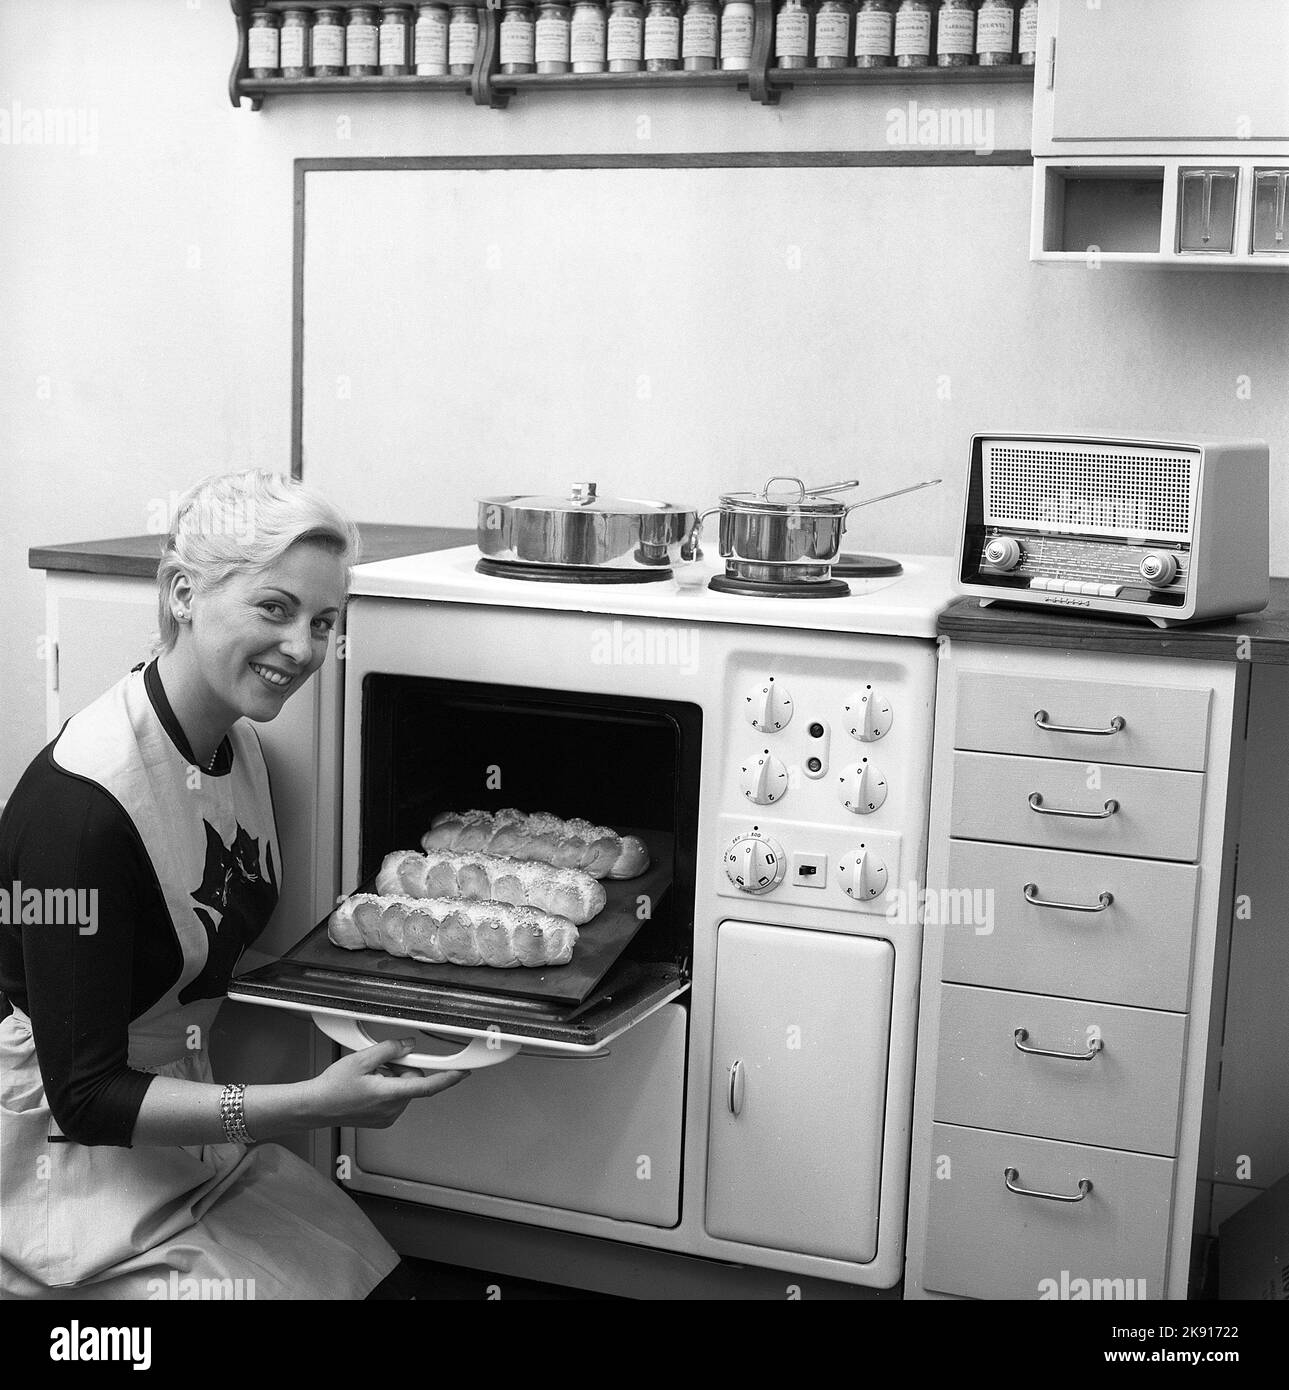 In the kitchen in the 1950s. A young woman in the kitchen taking out the ready baked breads from the oven. On top stainless steel pots and pans, a material that became popular after the aluminium era. Sweden 1959 ref Kristoffersson CQ97-6 Stock Photo